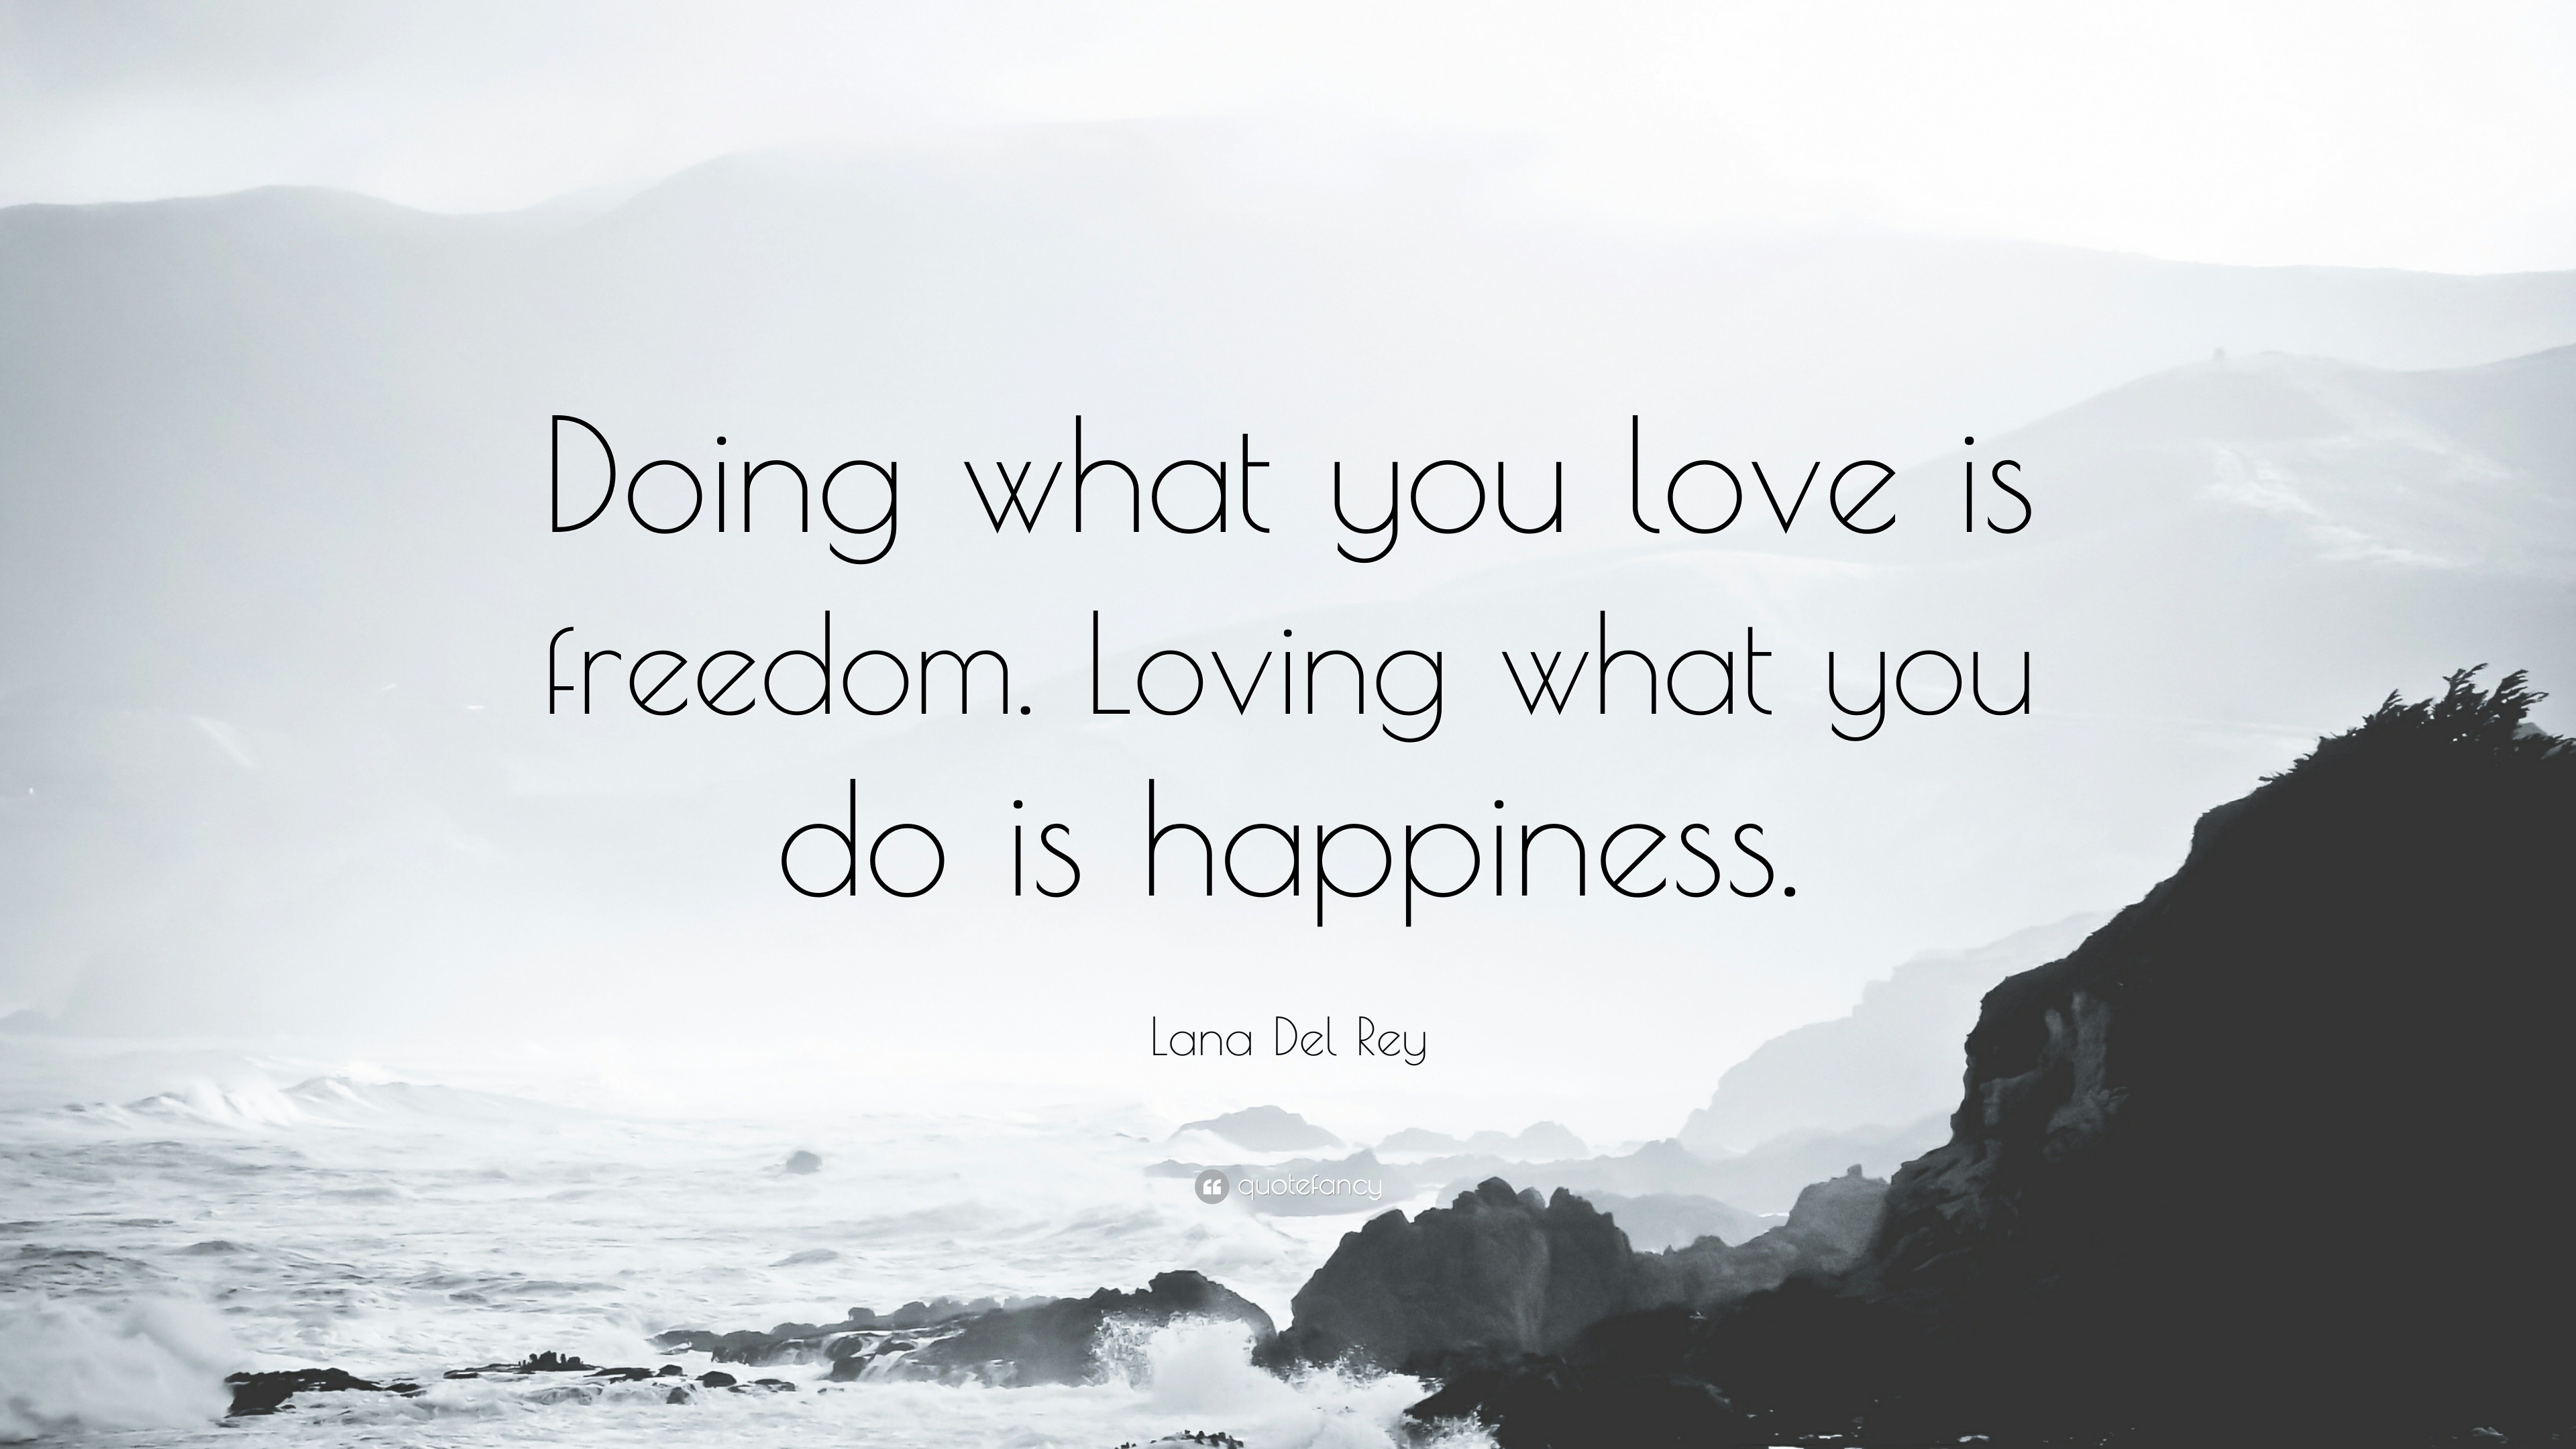 Lana Del Rey Quote “Doing what you love is freedom Loving what you